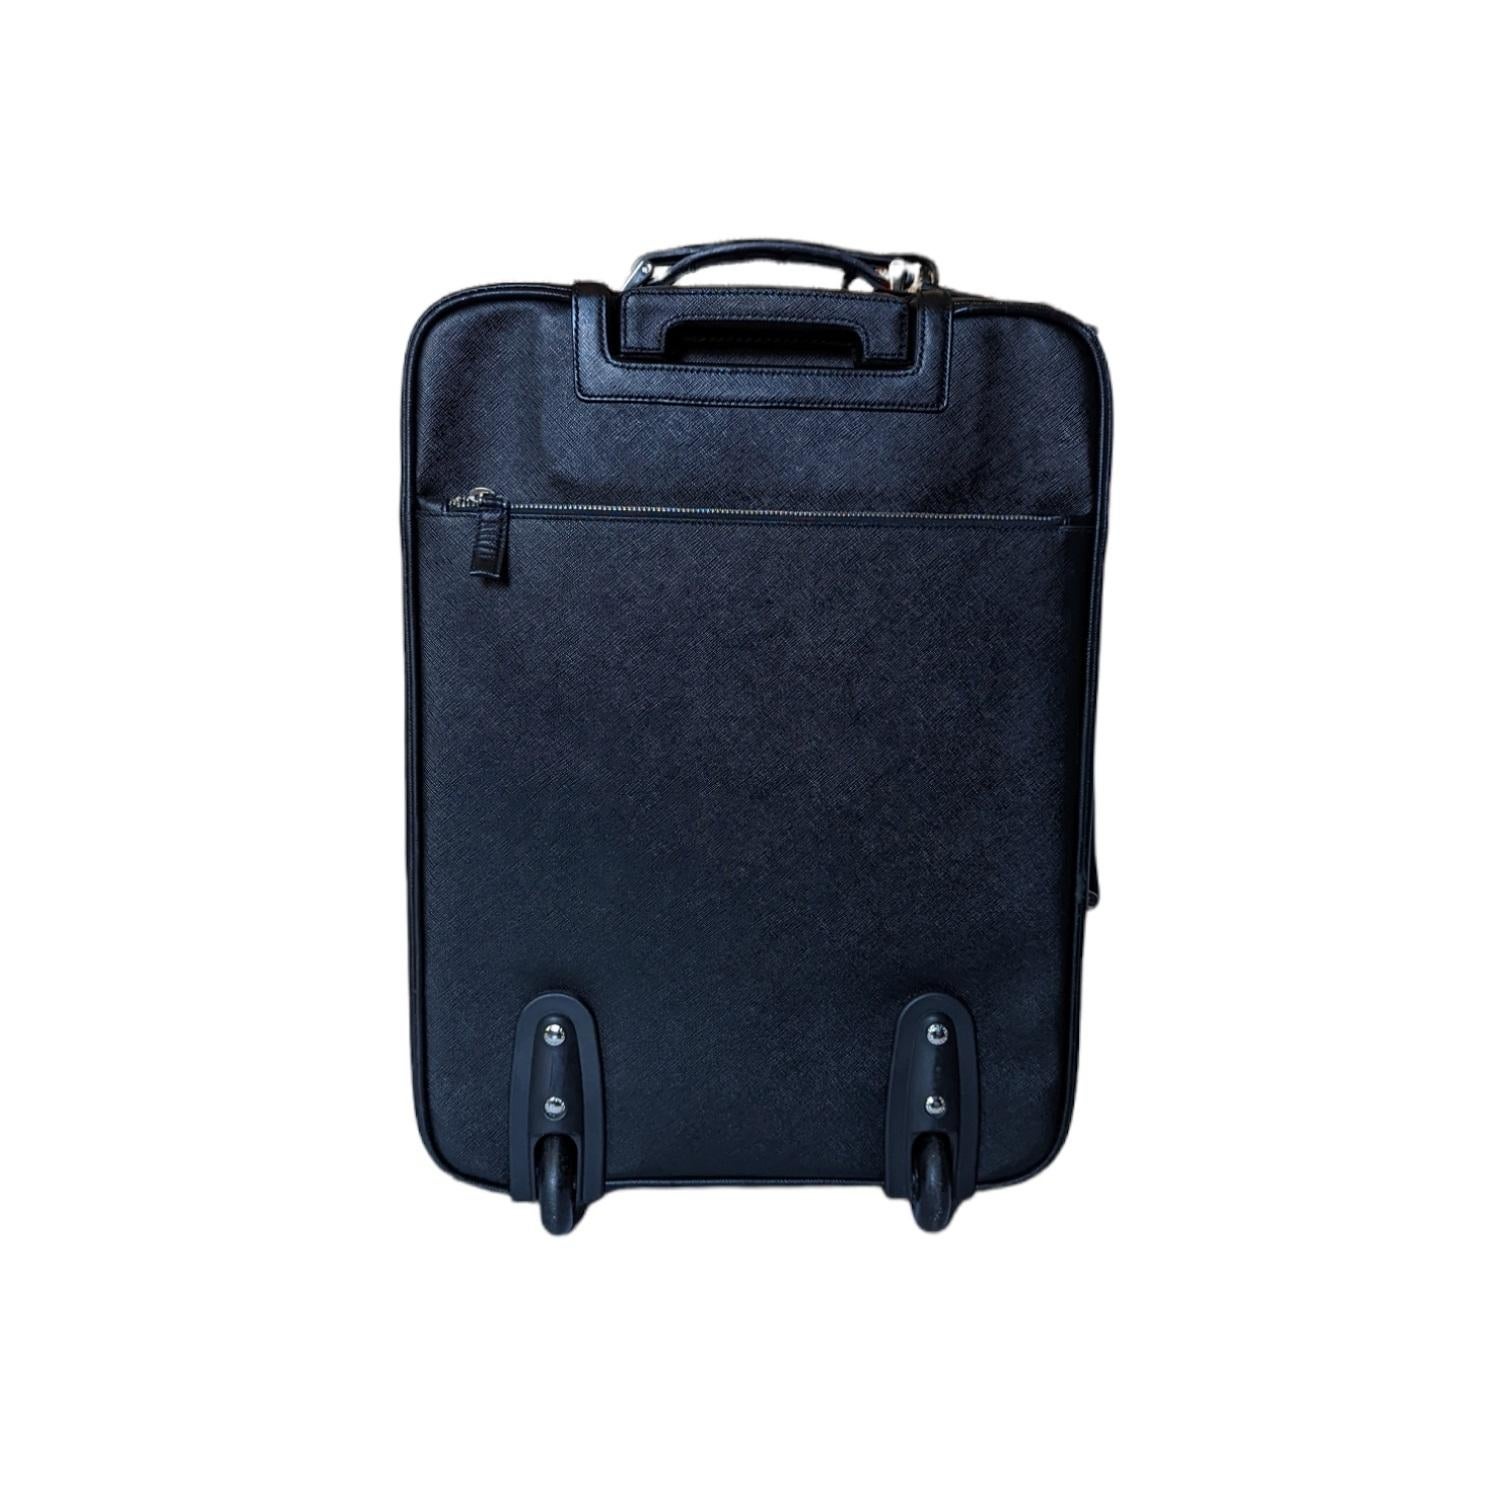 This is an exceptional piece of luggage expertly designed and crafted for your comfort and peace of mind. It is constructed of durable black Prada crossgrain leather on all sides. This is reinforced by cowhide leather trim. It has a wide pocket on